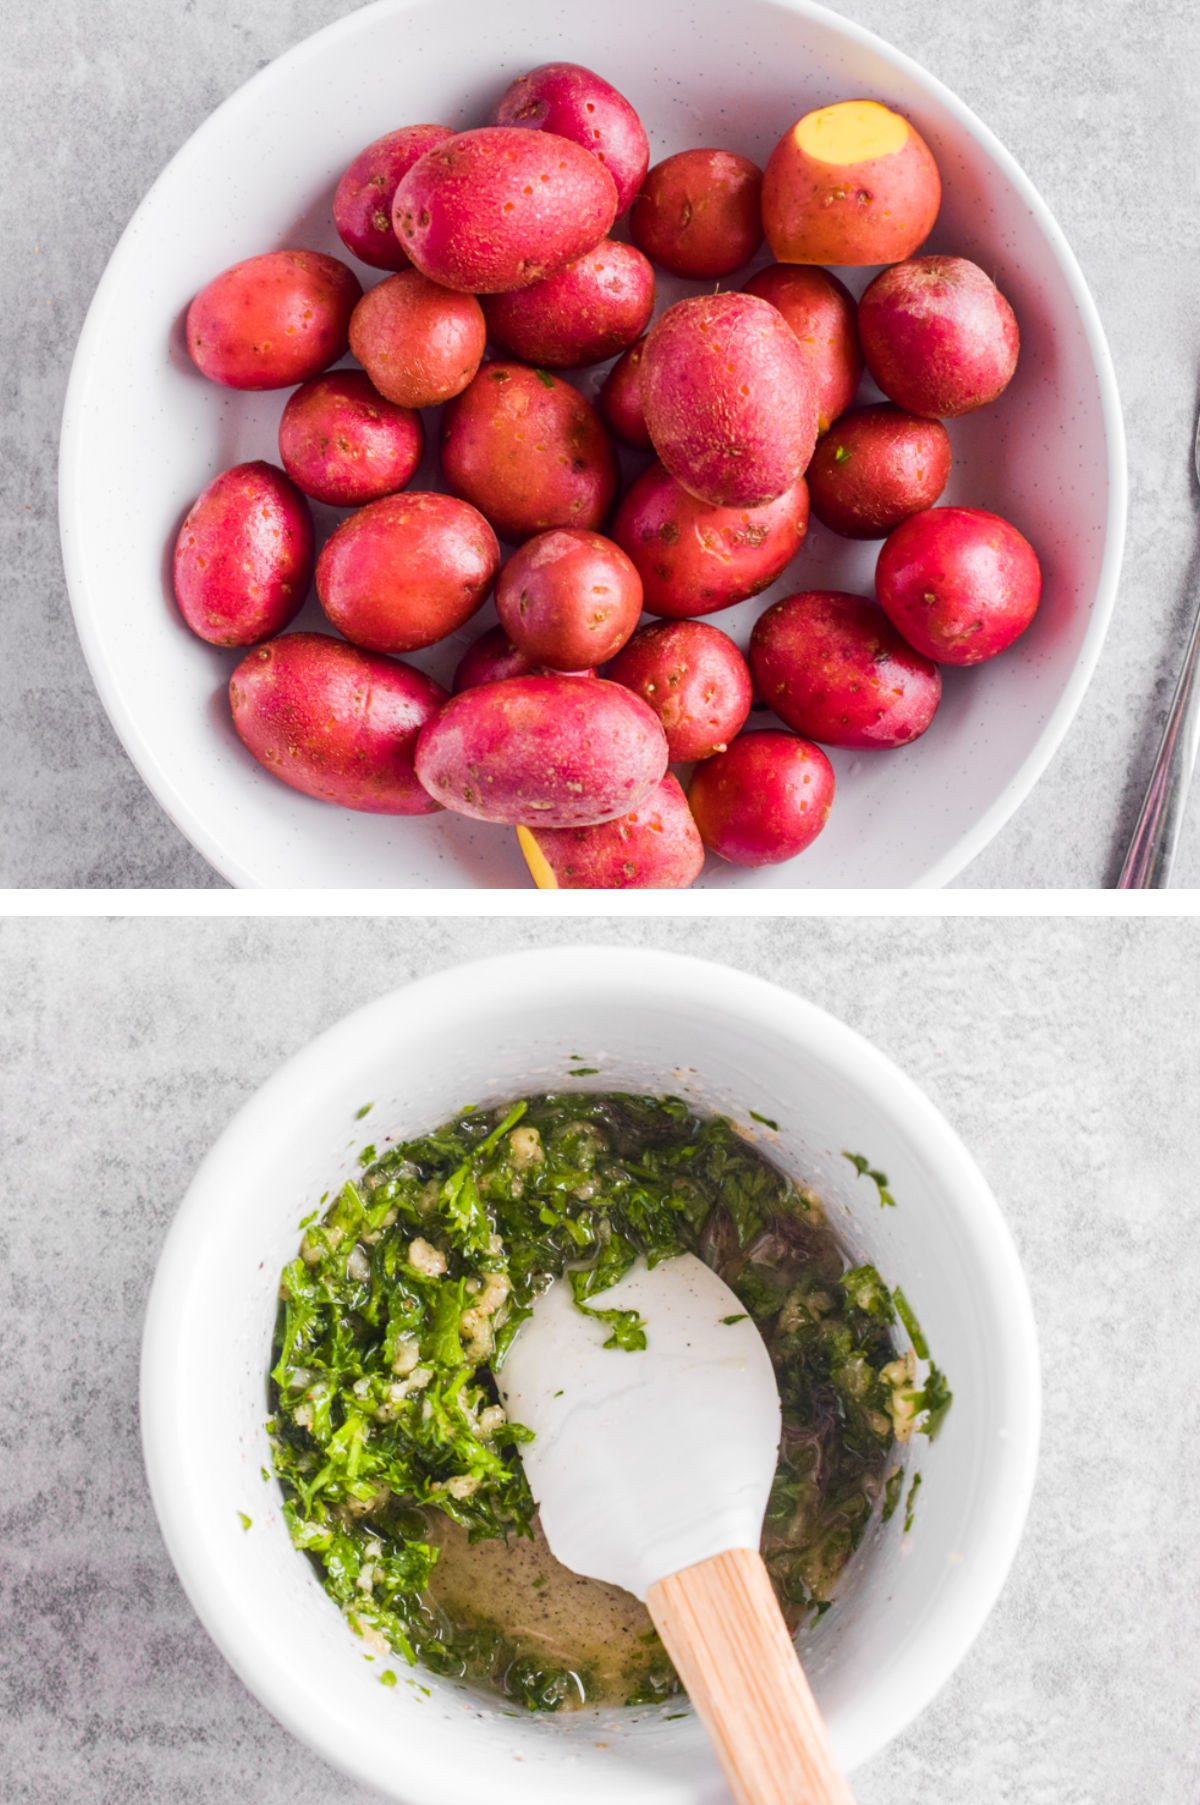 Two overhead images in one: 1. Raw, washed potatoes in a white bowl. 2. Ingredients for dressing being mixed in a separate white bowl. 